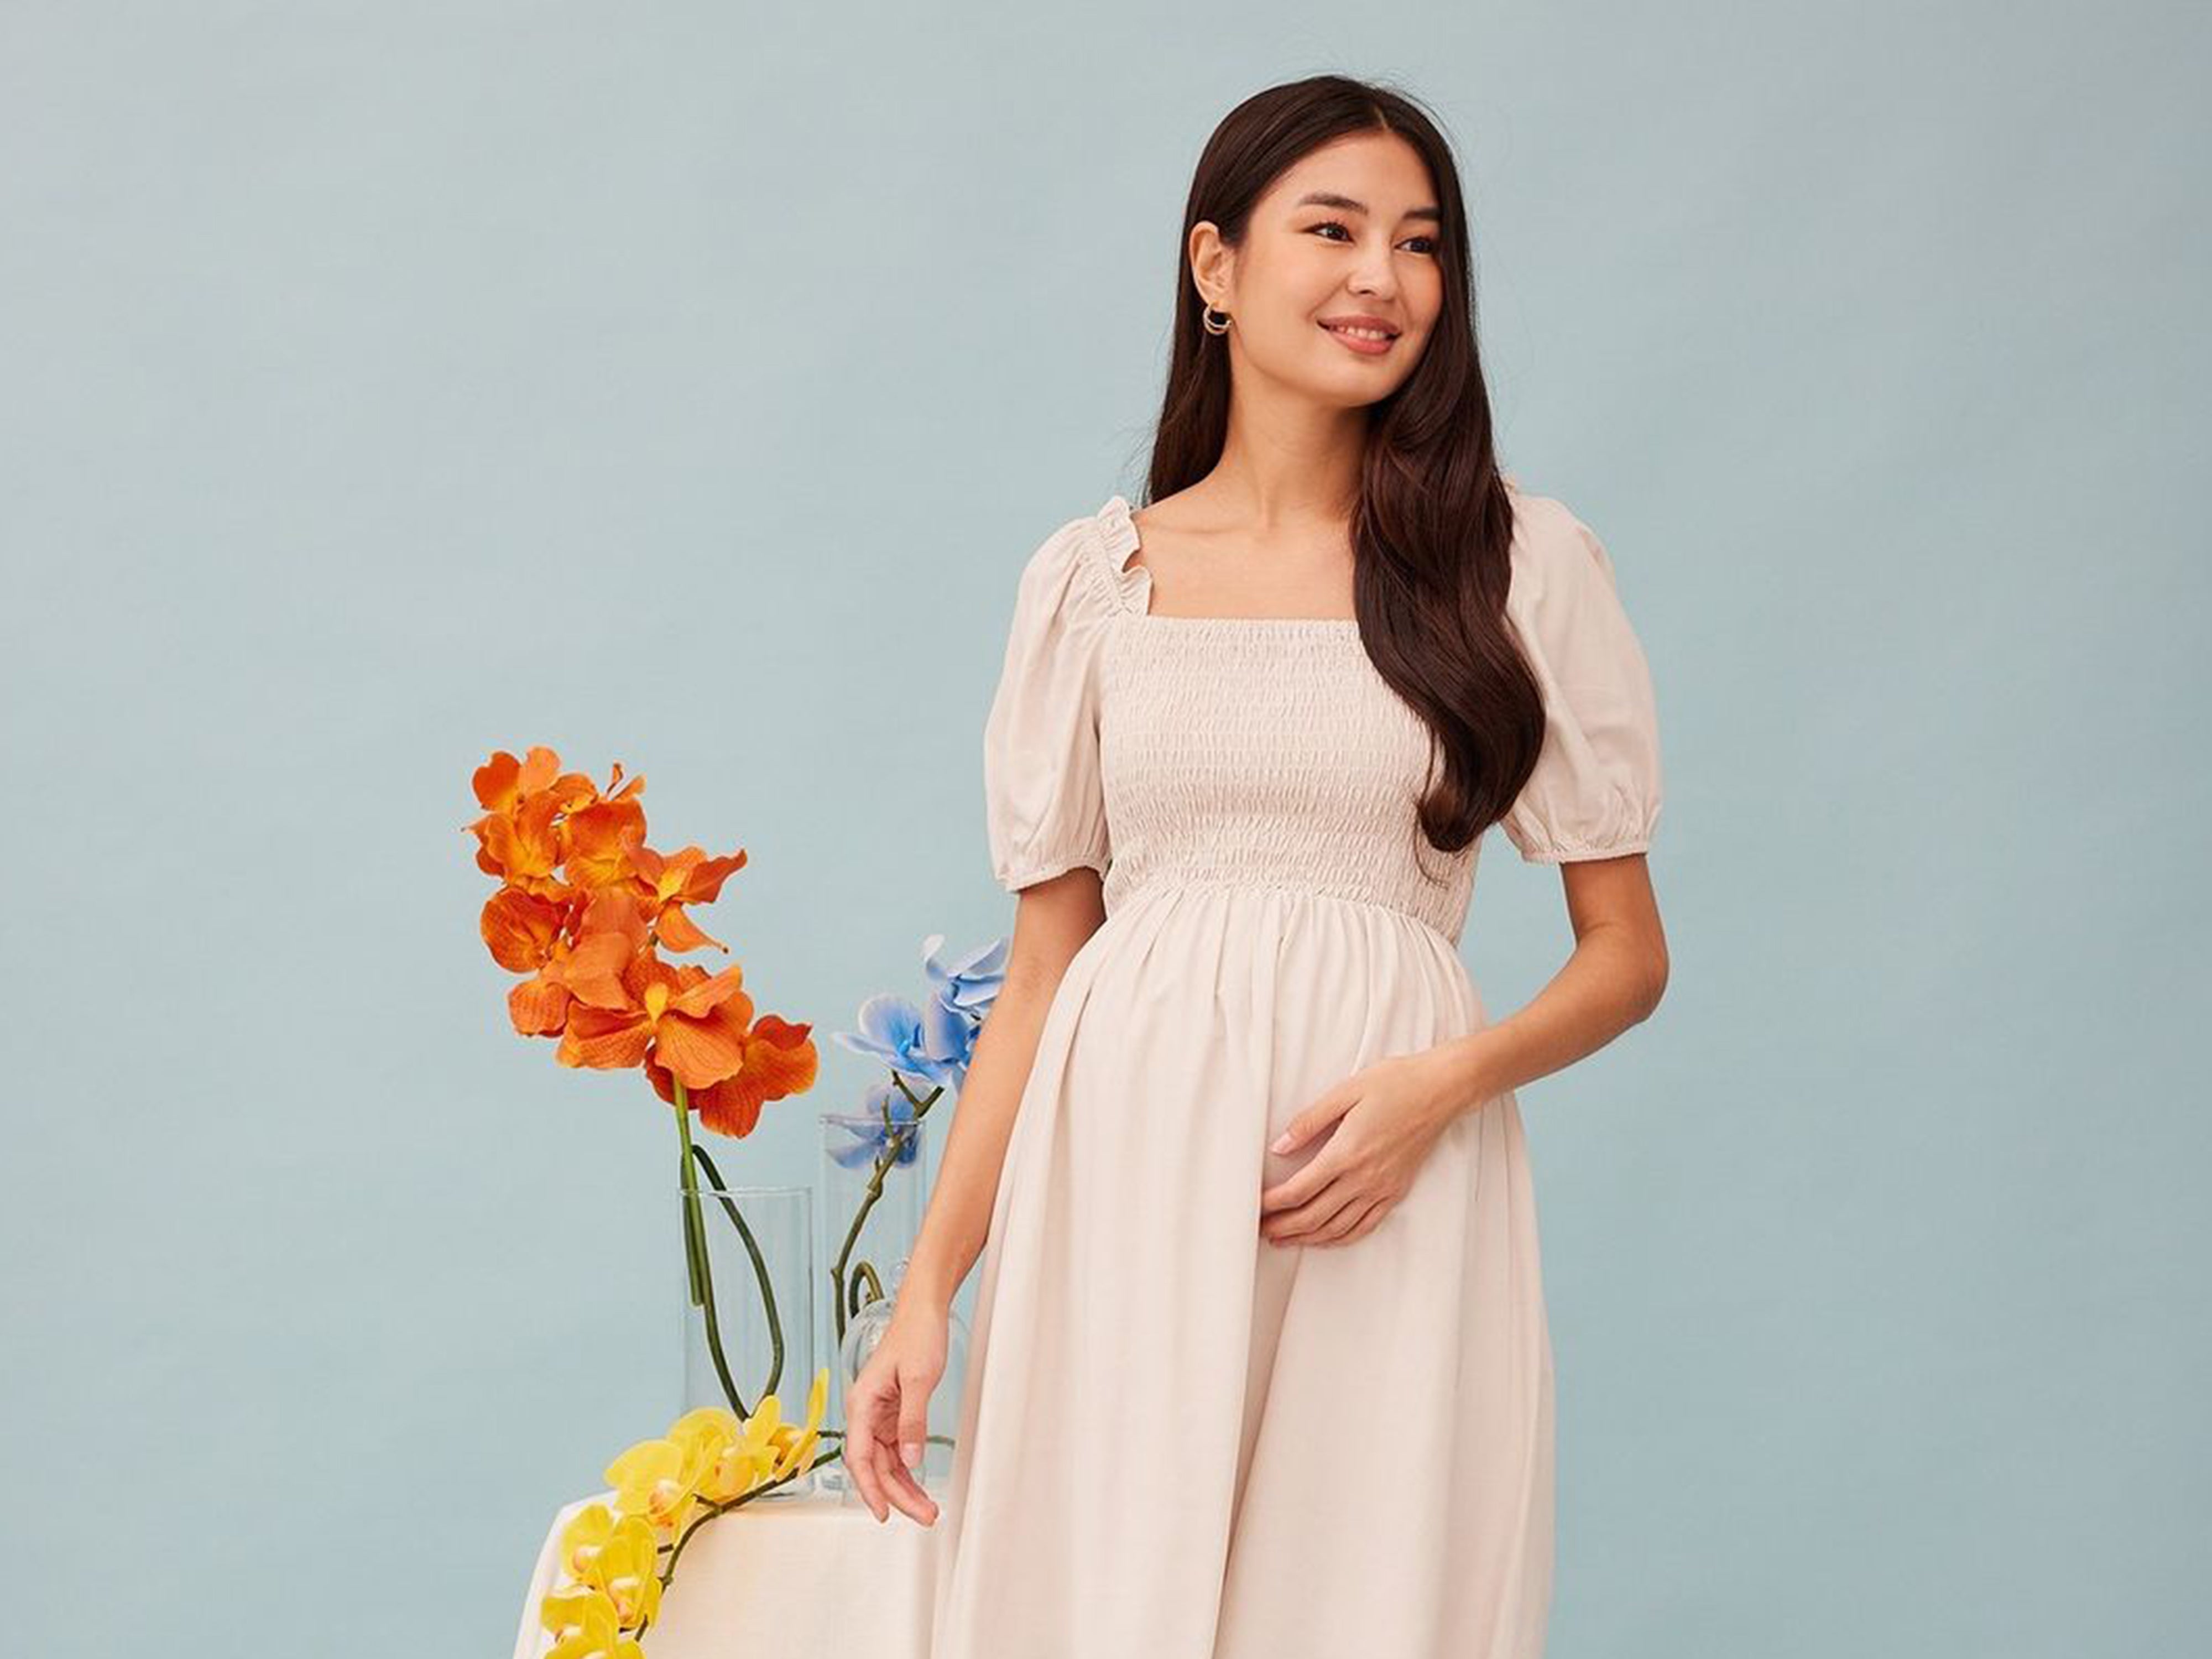 8 Best Maternity Wear & Nursing-Friendly Clothes in Singapore